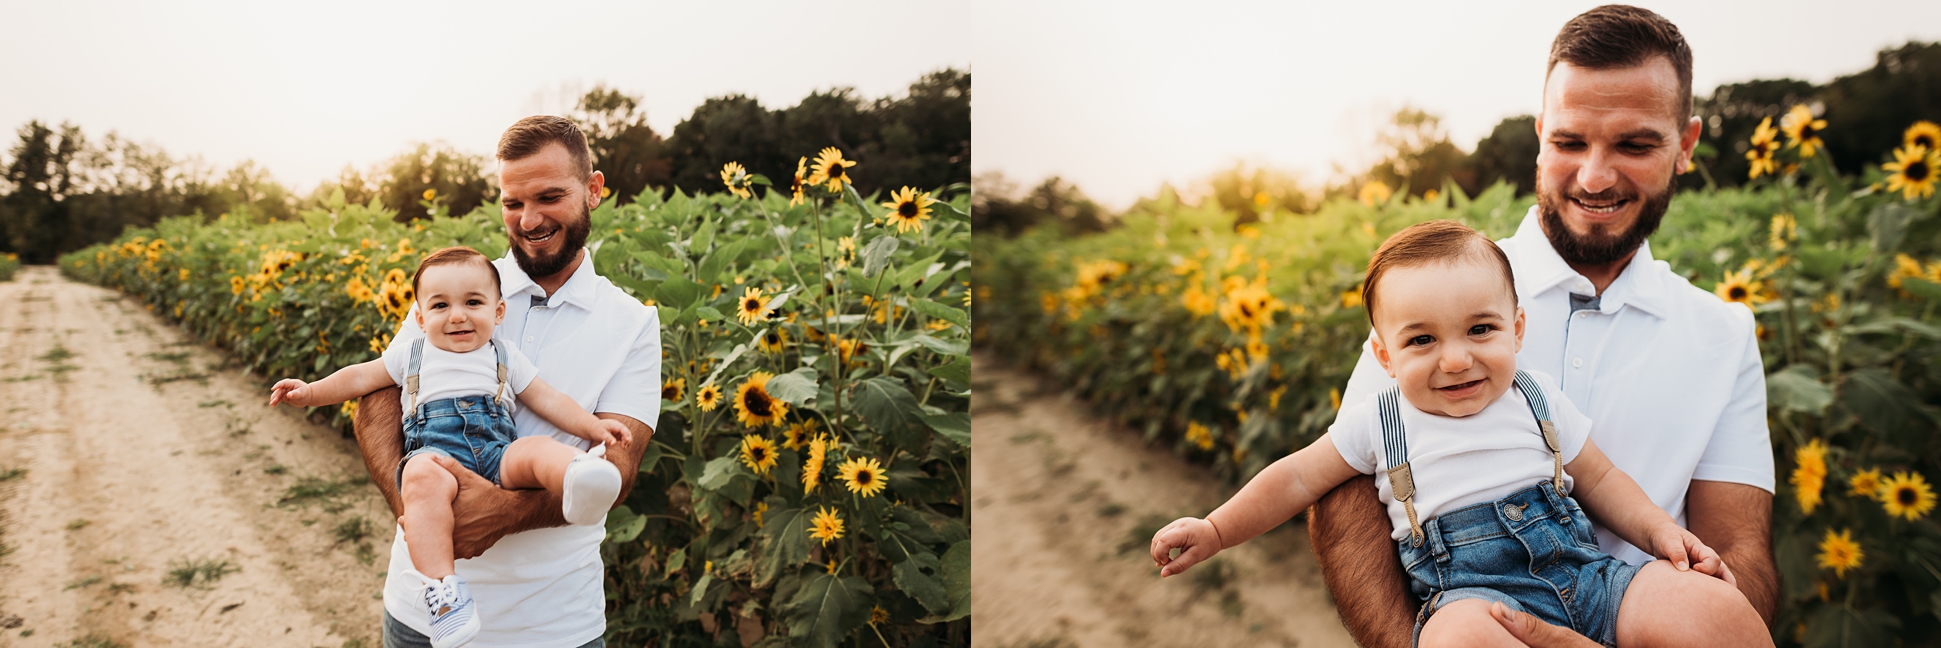 south jersey family session sunflower field dalton farms 